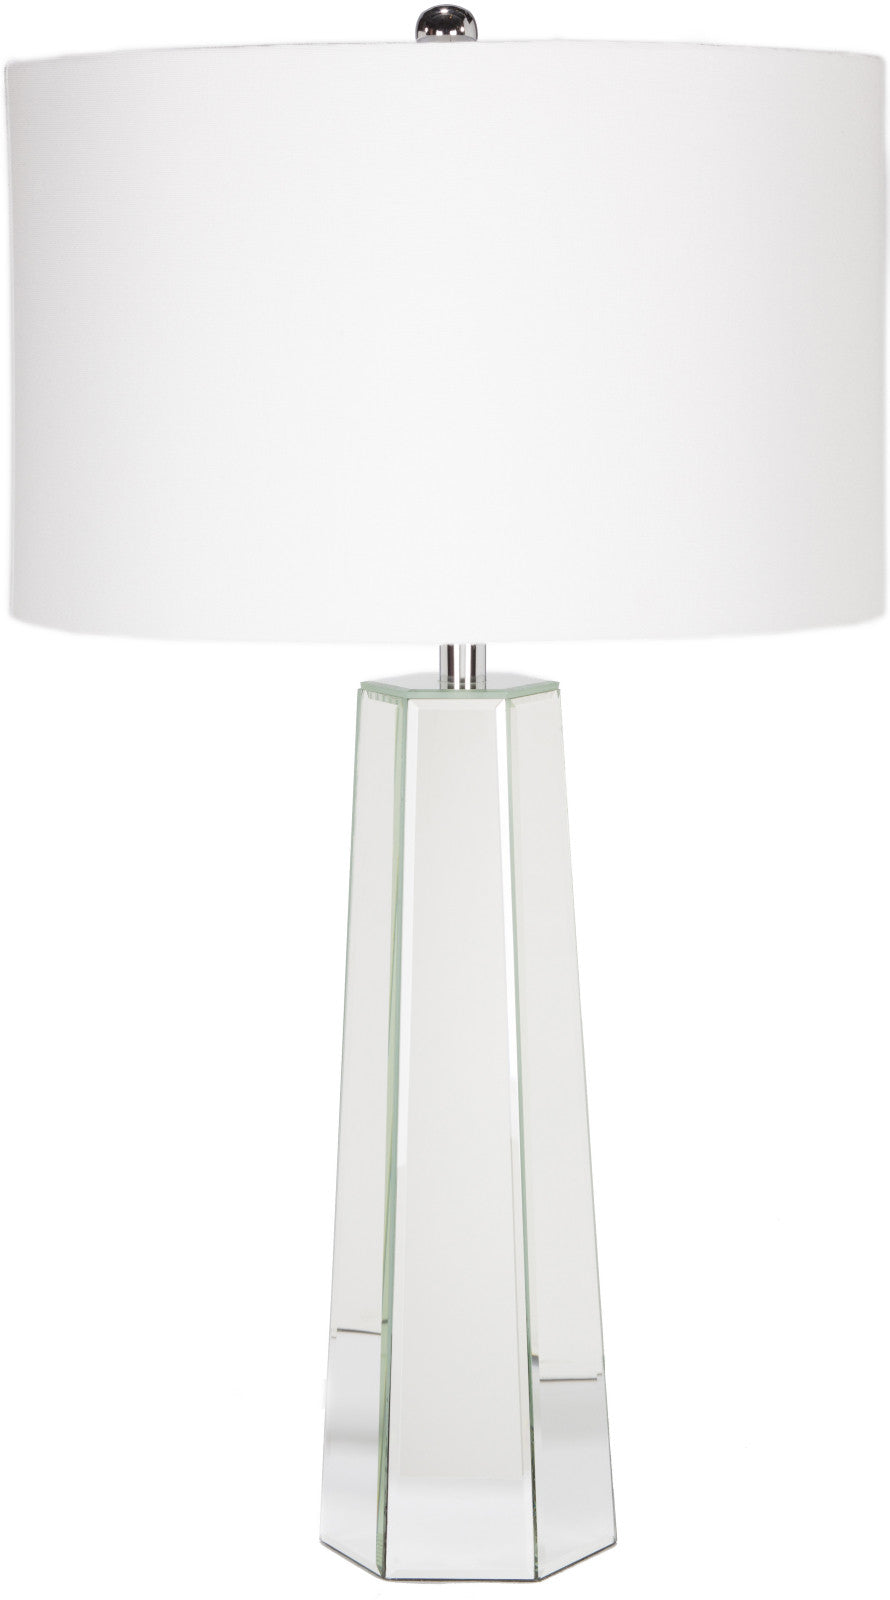 Surya Perry PRLP-002 White Lamp Table Lamp